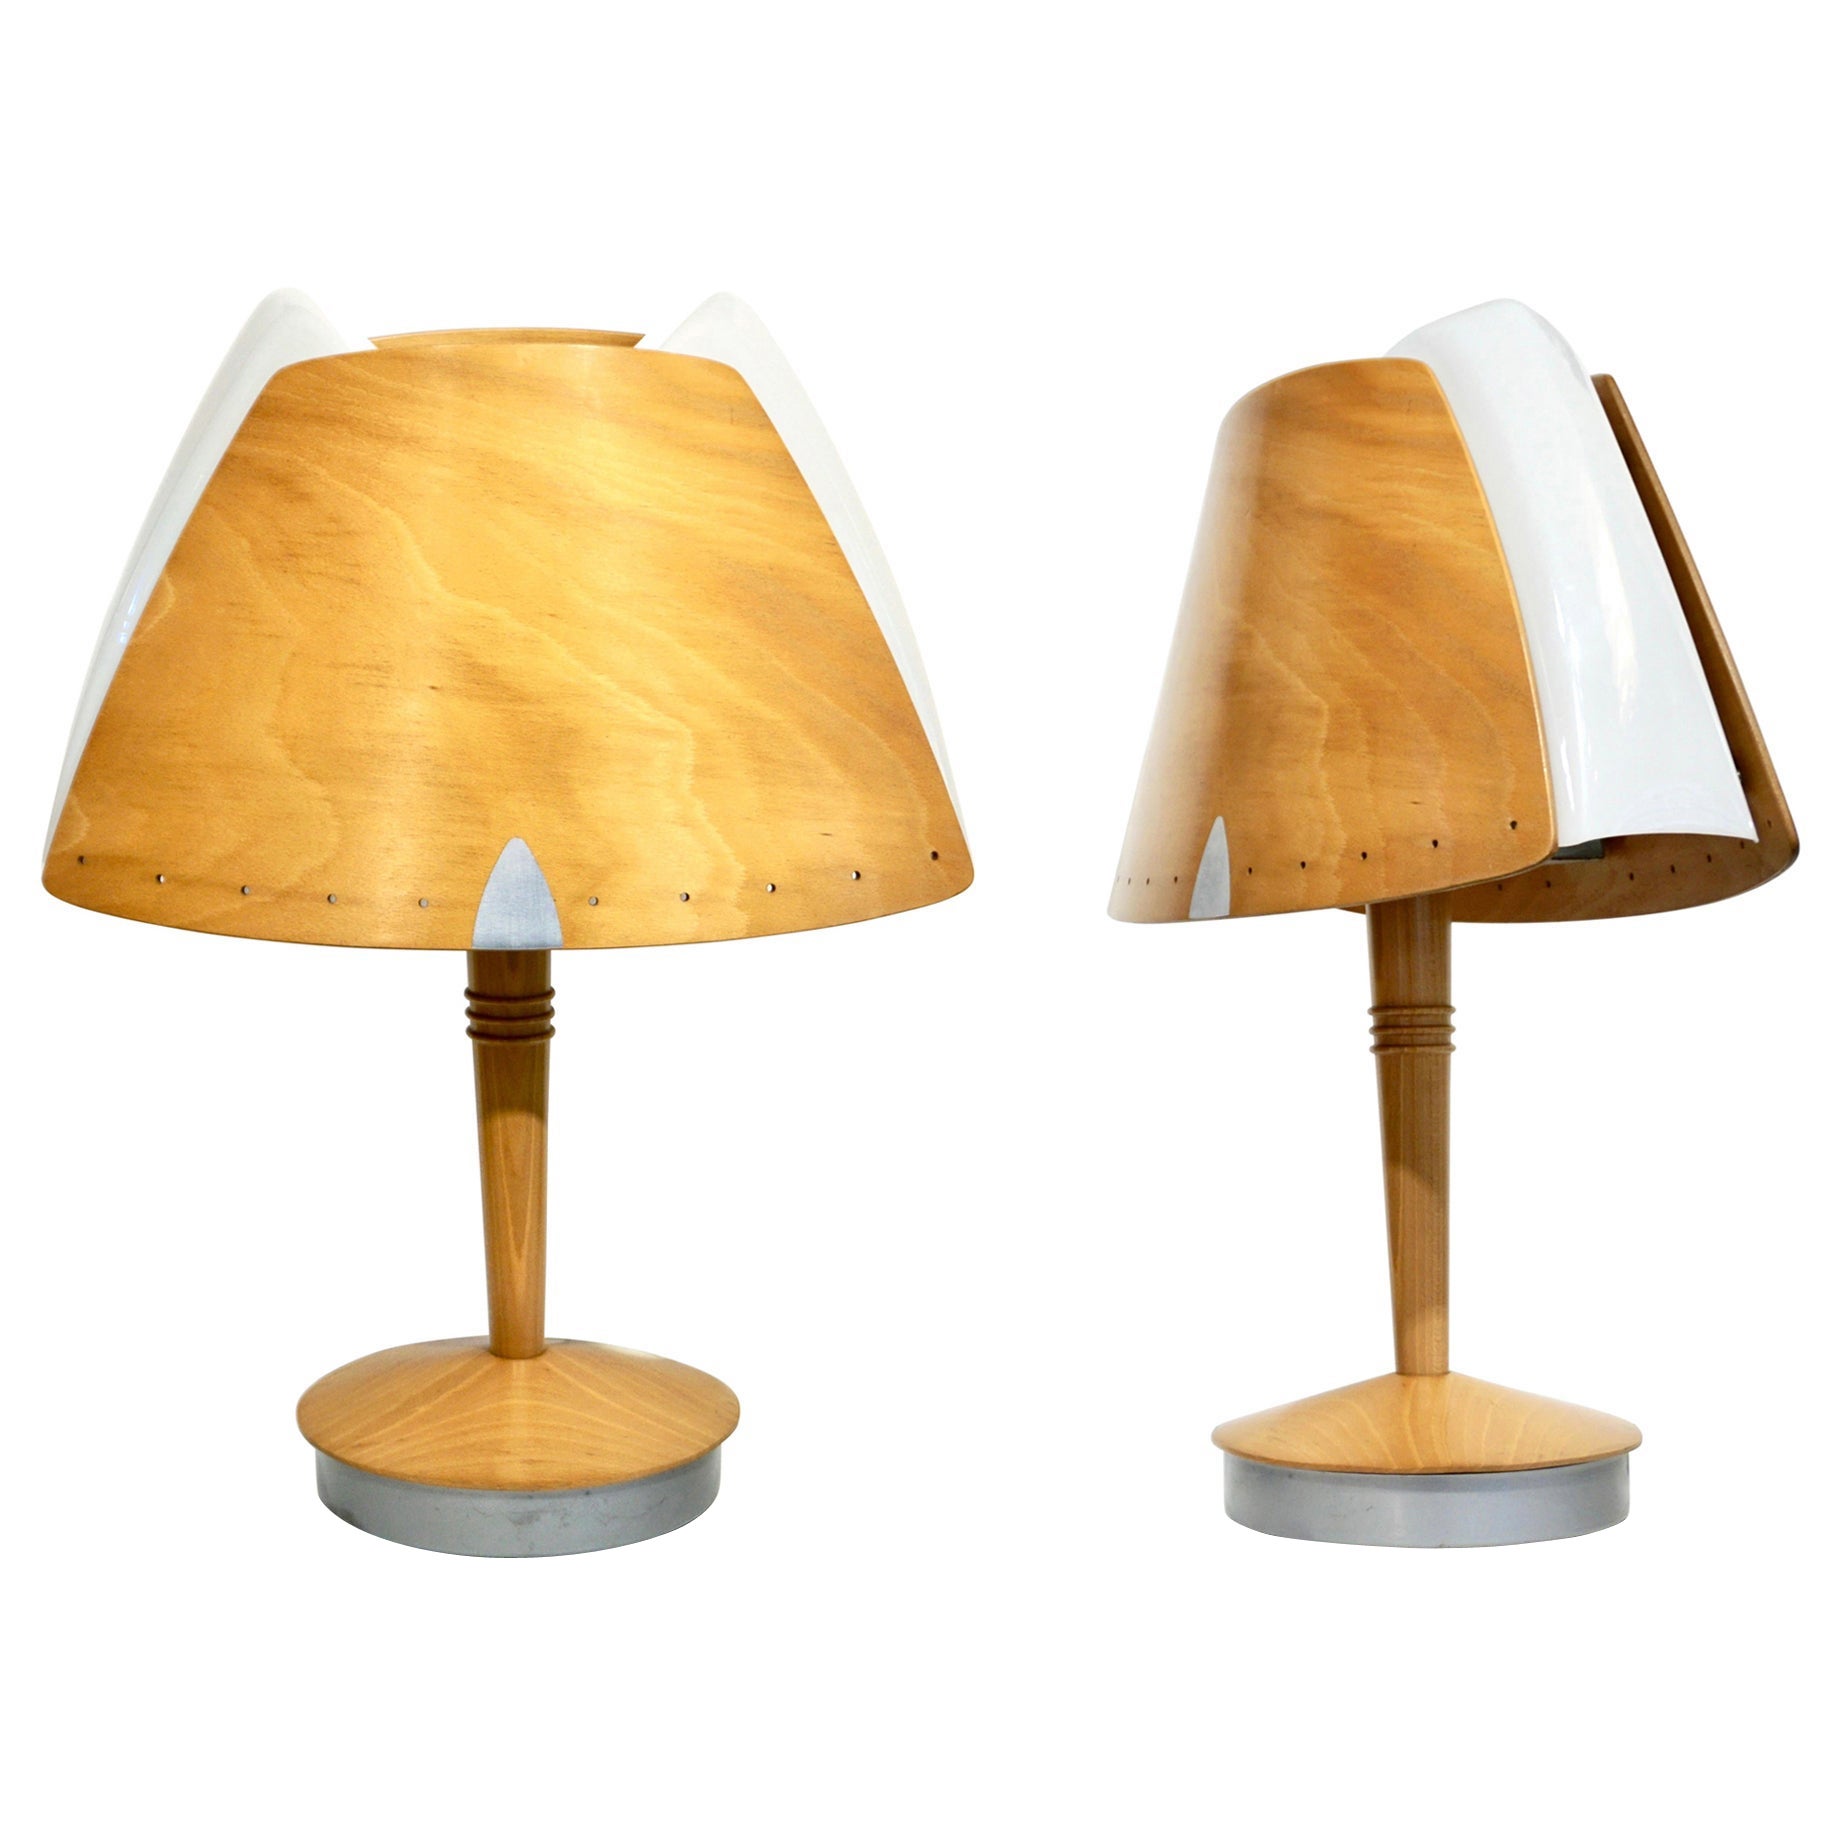 1970 French Pair of Birch Wood and Acrylic Table Lamp for Barcelona Hilton Hotel For Sale